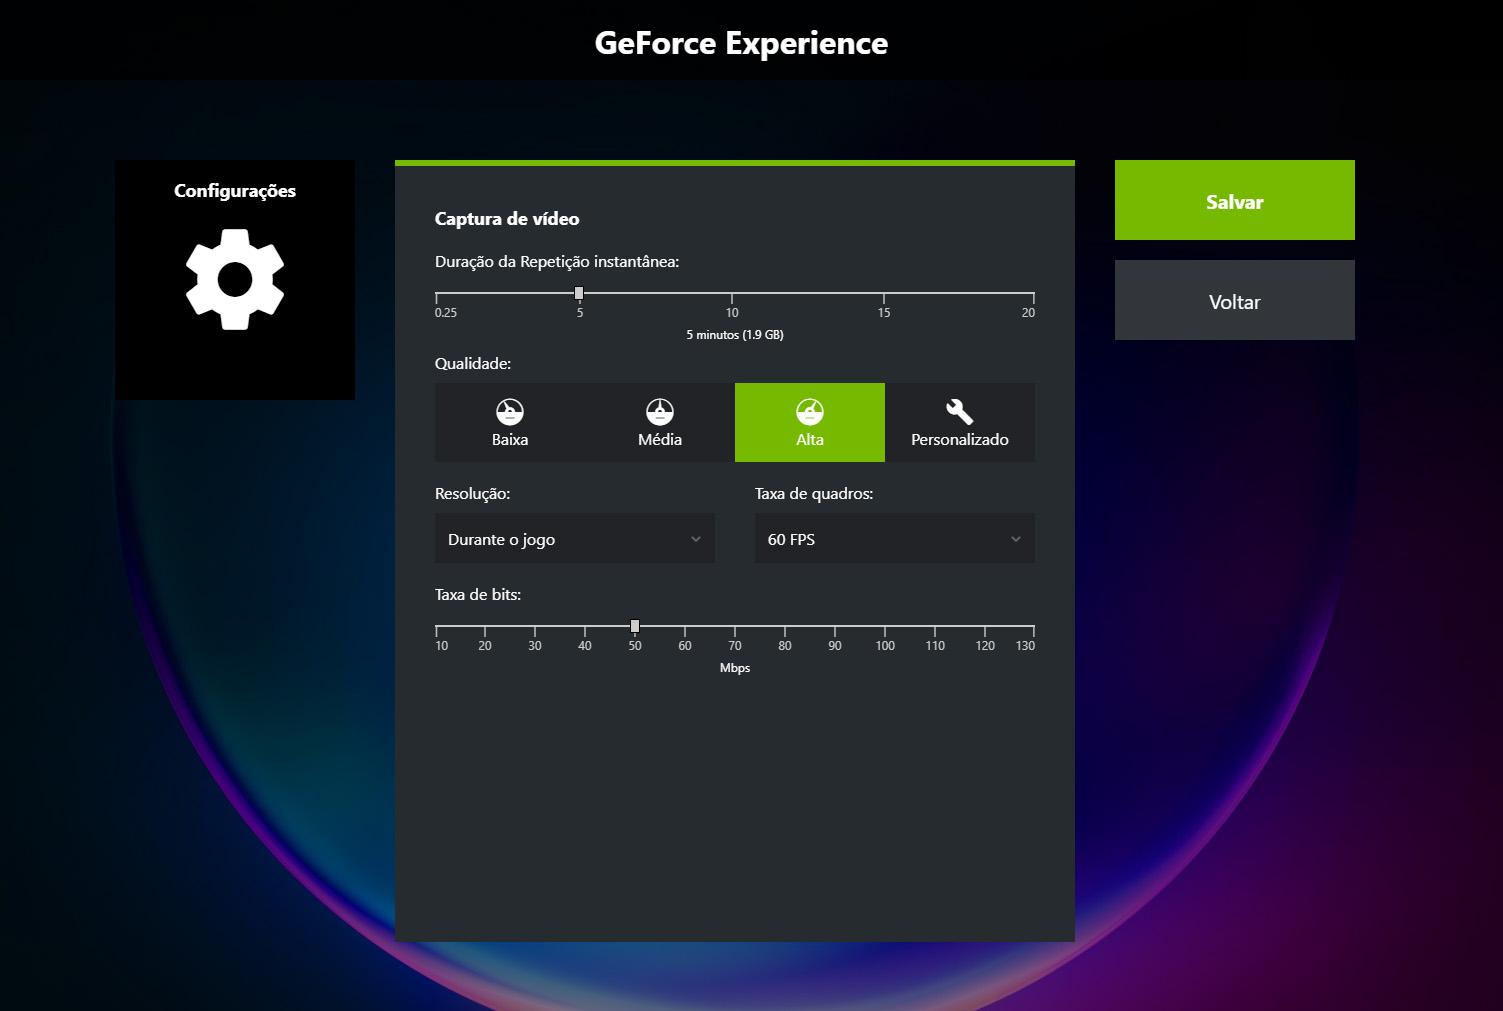 Video Capture Configuration Panel (Source: GeForce Experience/Playback)